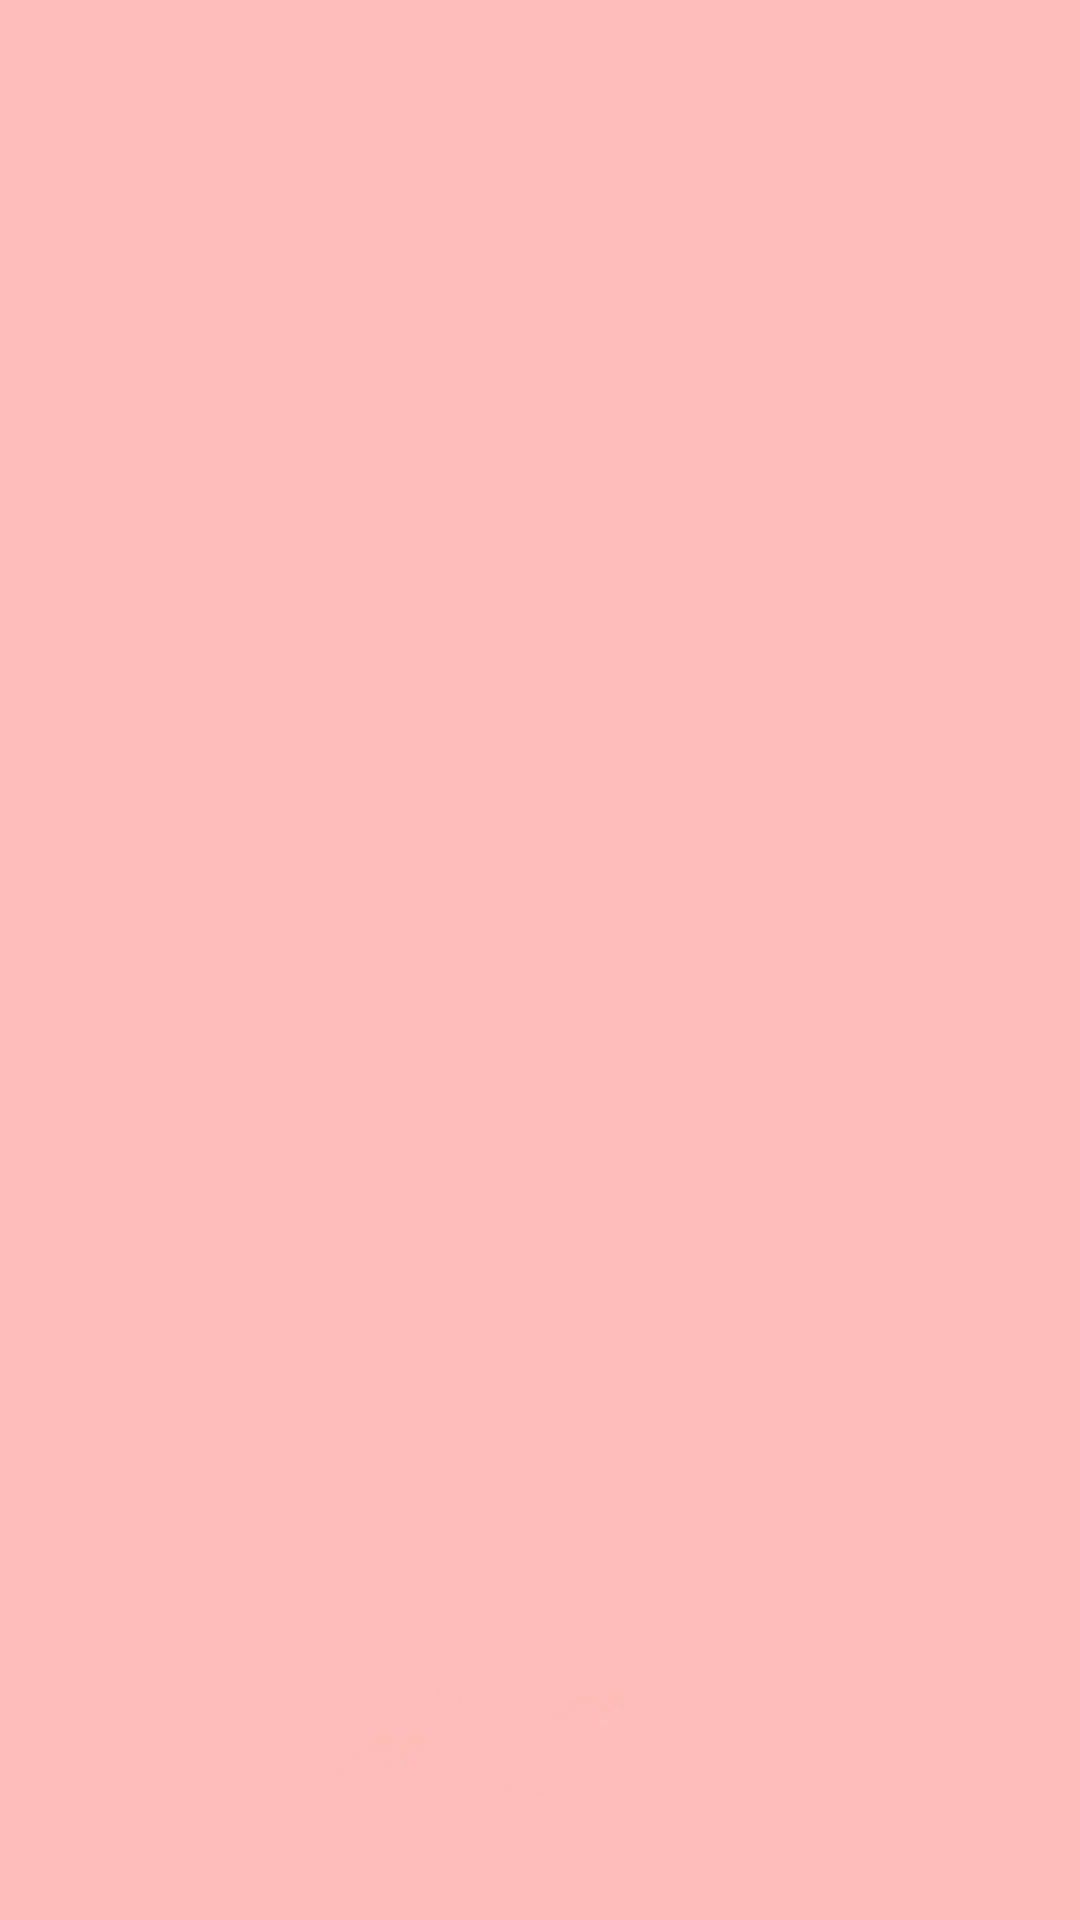 A Pink Background With A Small White Square Wallpaper